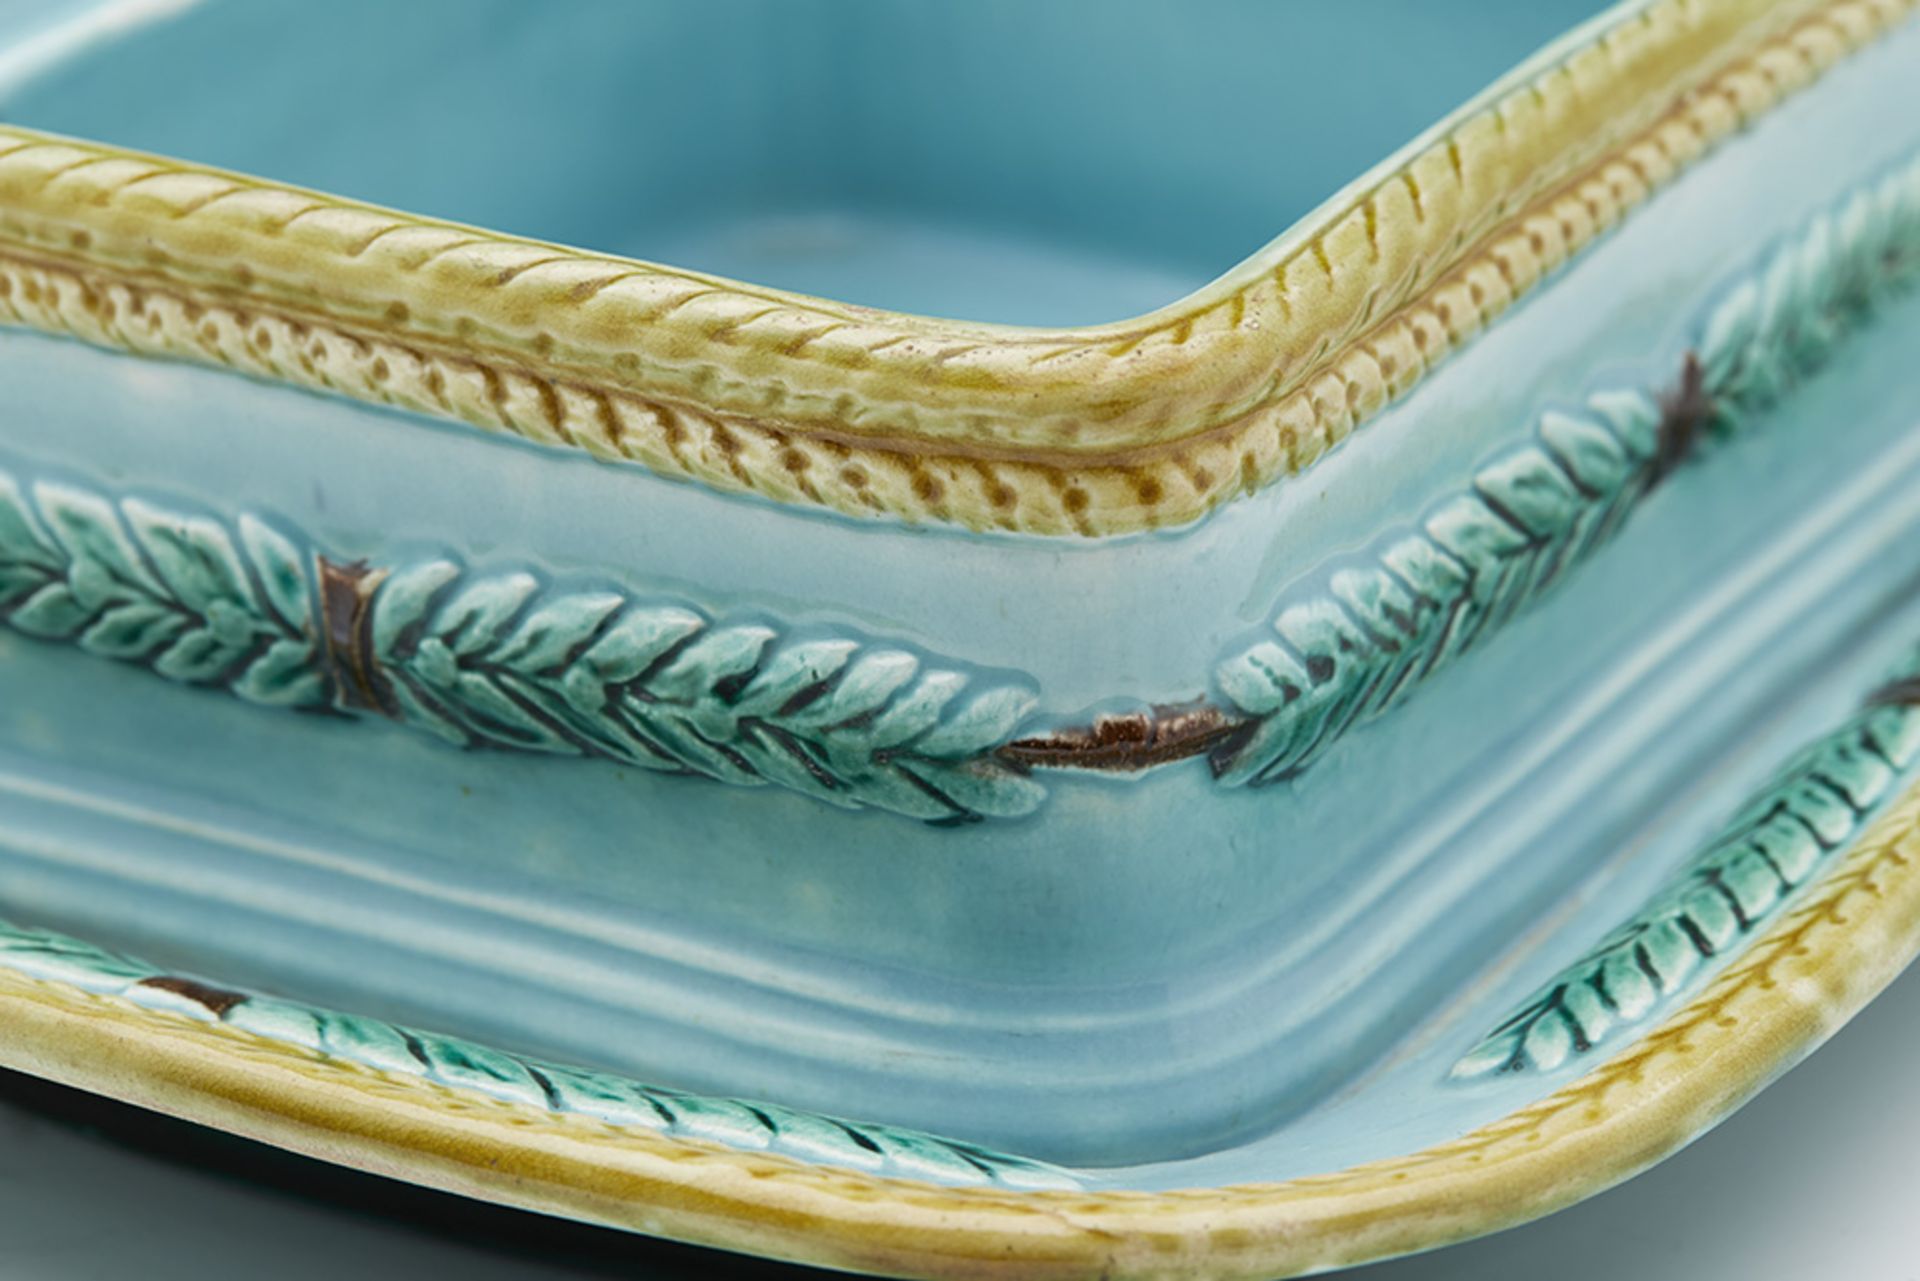 Antique English Majolica Sardine Dish With Fish And Leaves C.1865 - Image 4 of 10